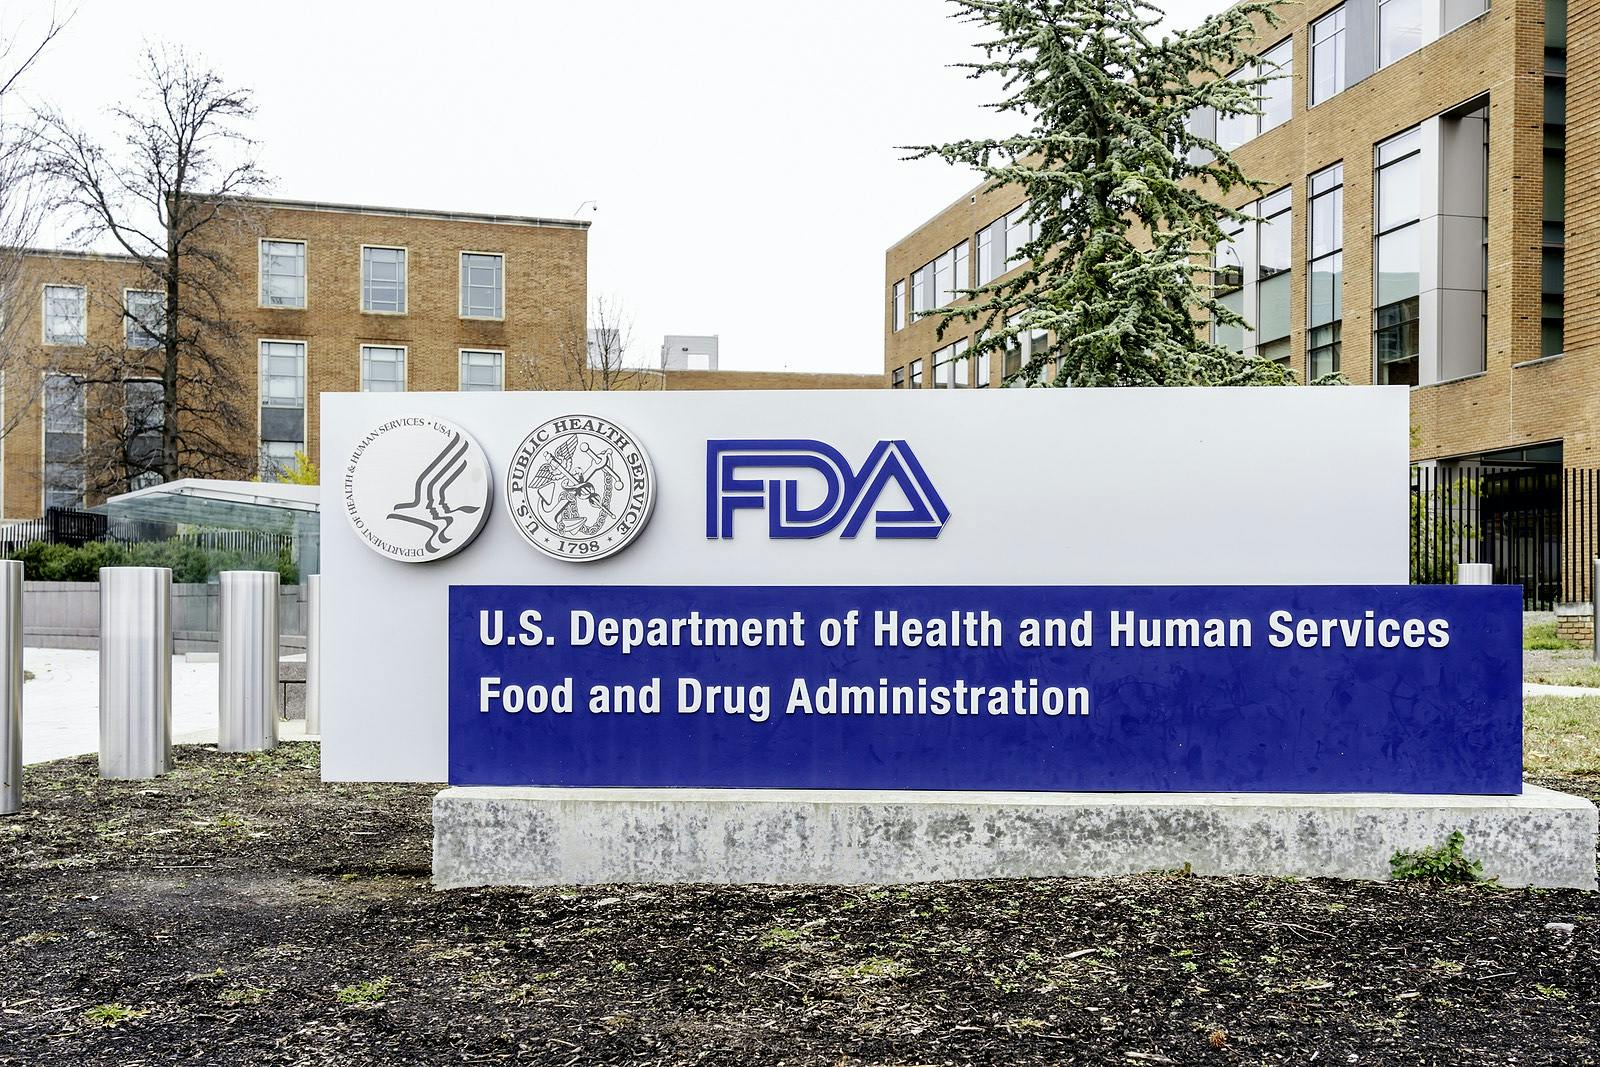 FDA sign in front of buildings